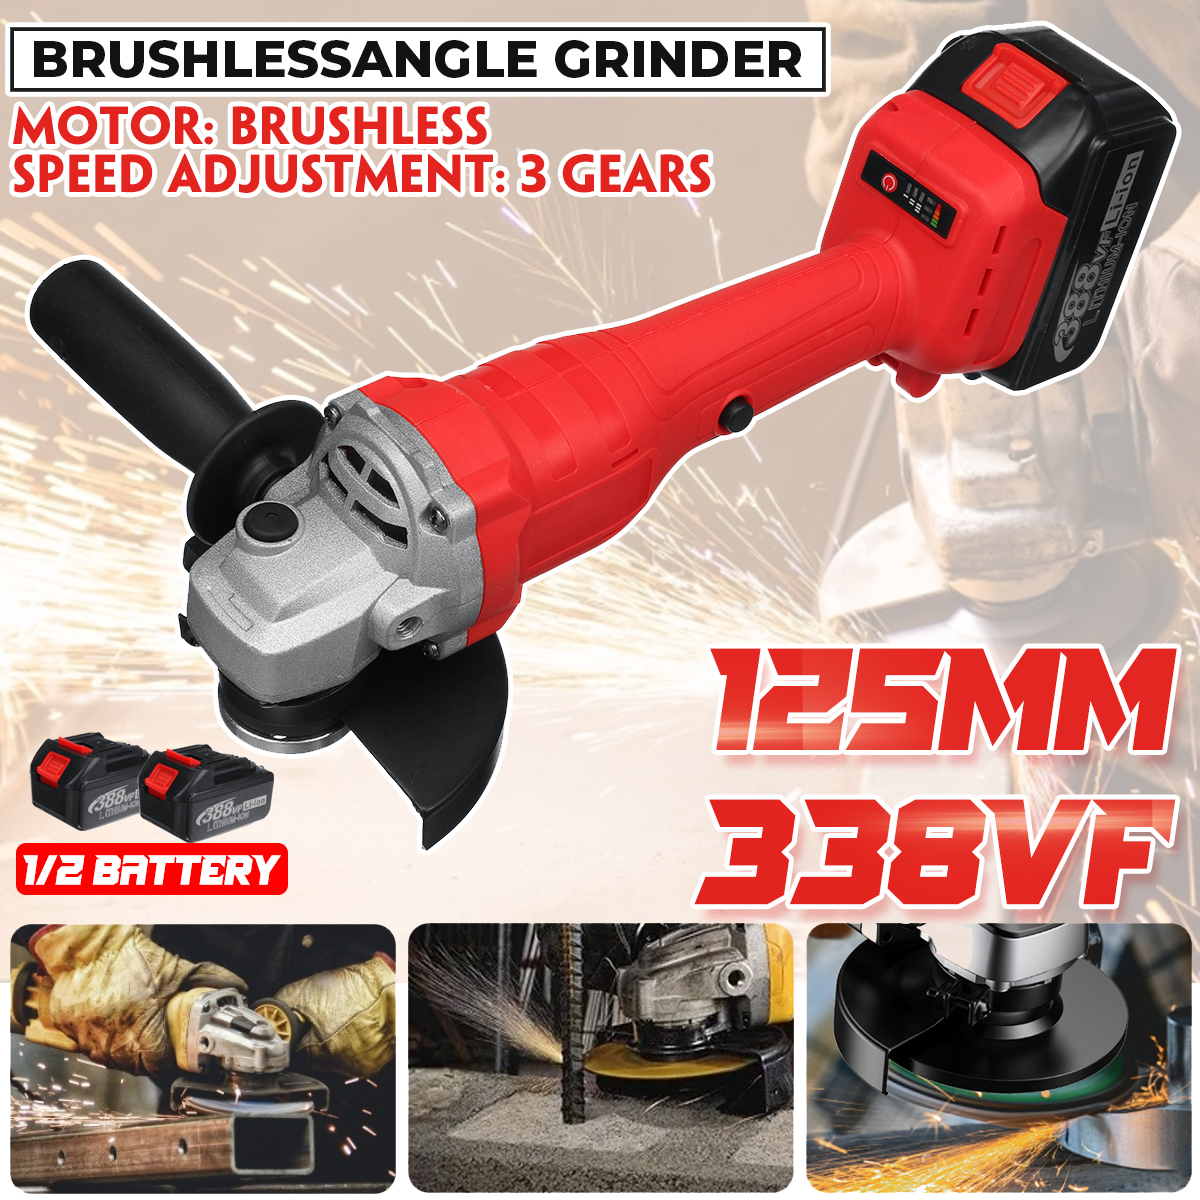 388VF-125MM-1500W-Cordless-Brushless-Angle-Grinder-Electric-Polisher-W-None12-Battery-Cutting-Sand-D-1879534-1